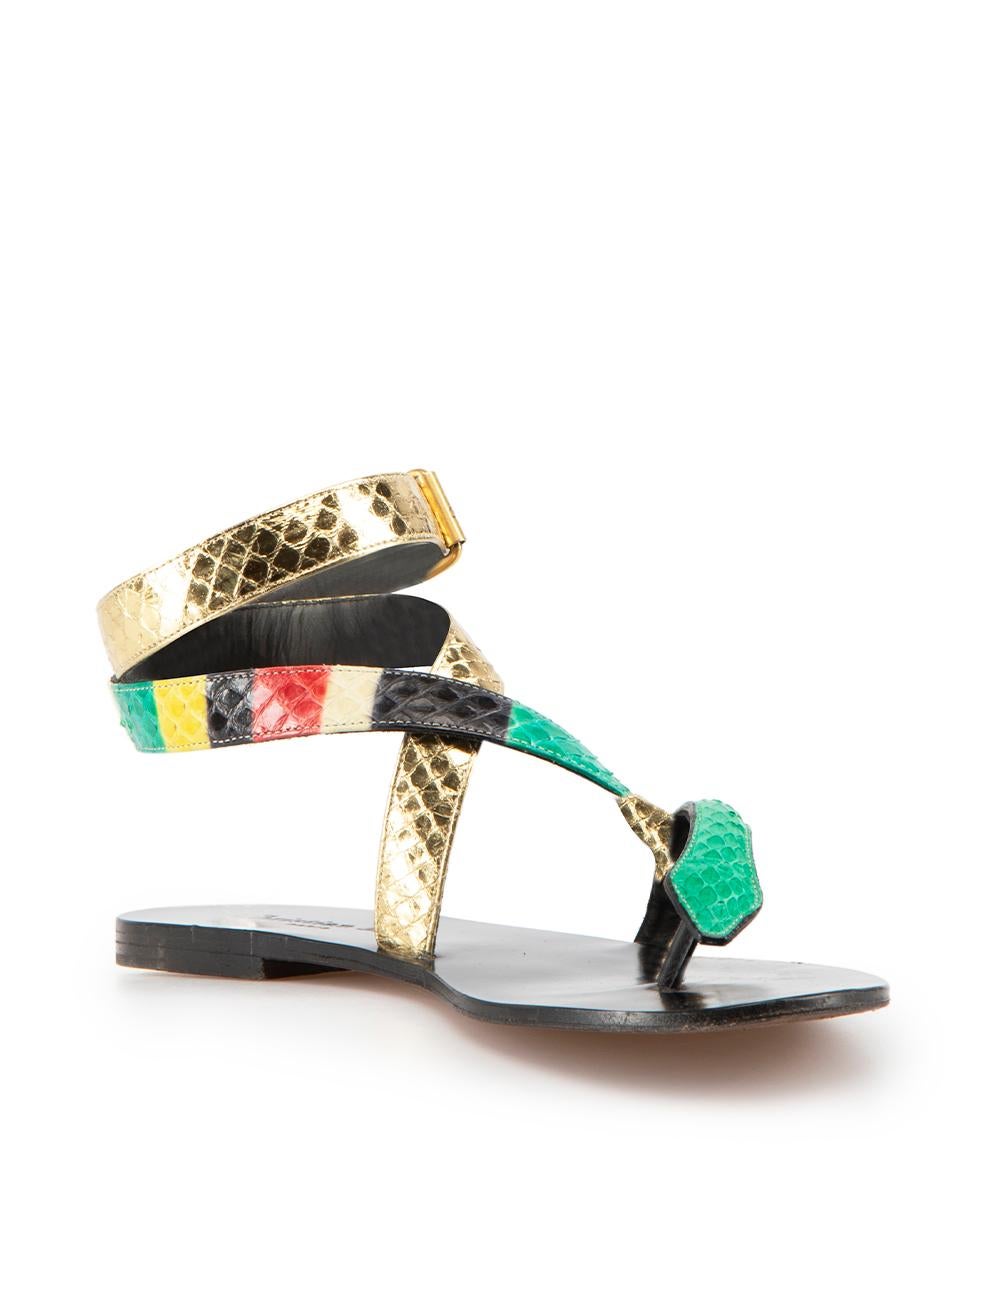 CONDITION is Very good. Minimal wear to sandals is evident. Minimal wear to insole and sole of both shoes where indents and scratches are visible on this used Christian Dior designer resale item.

Details
Limited edition
Multicolour
Snakeskin
Thong